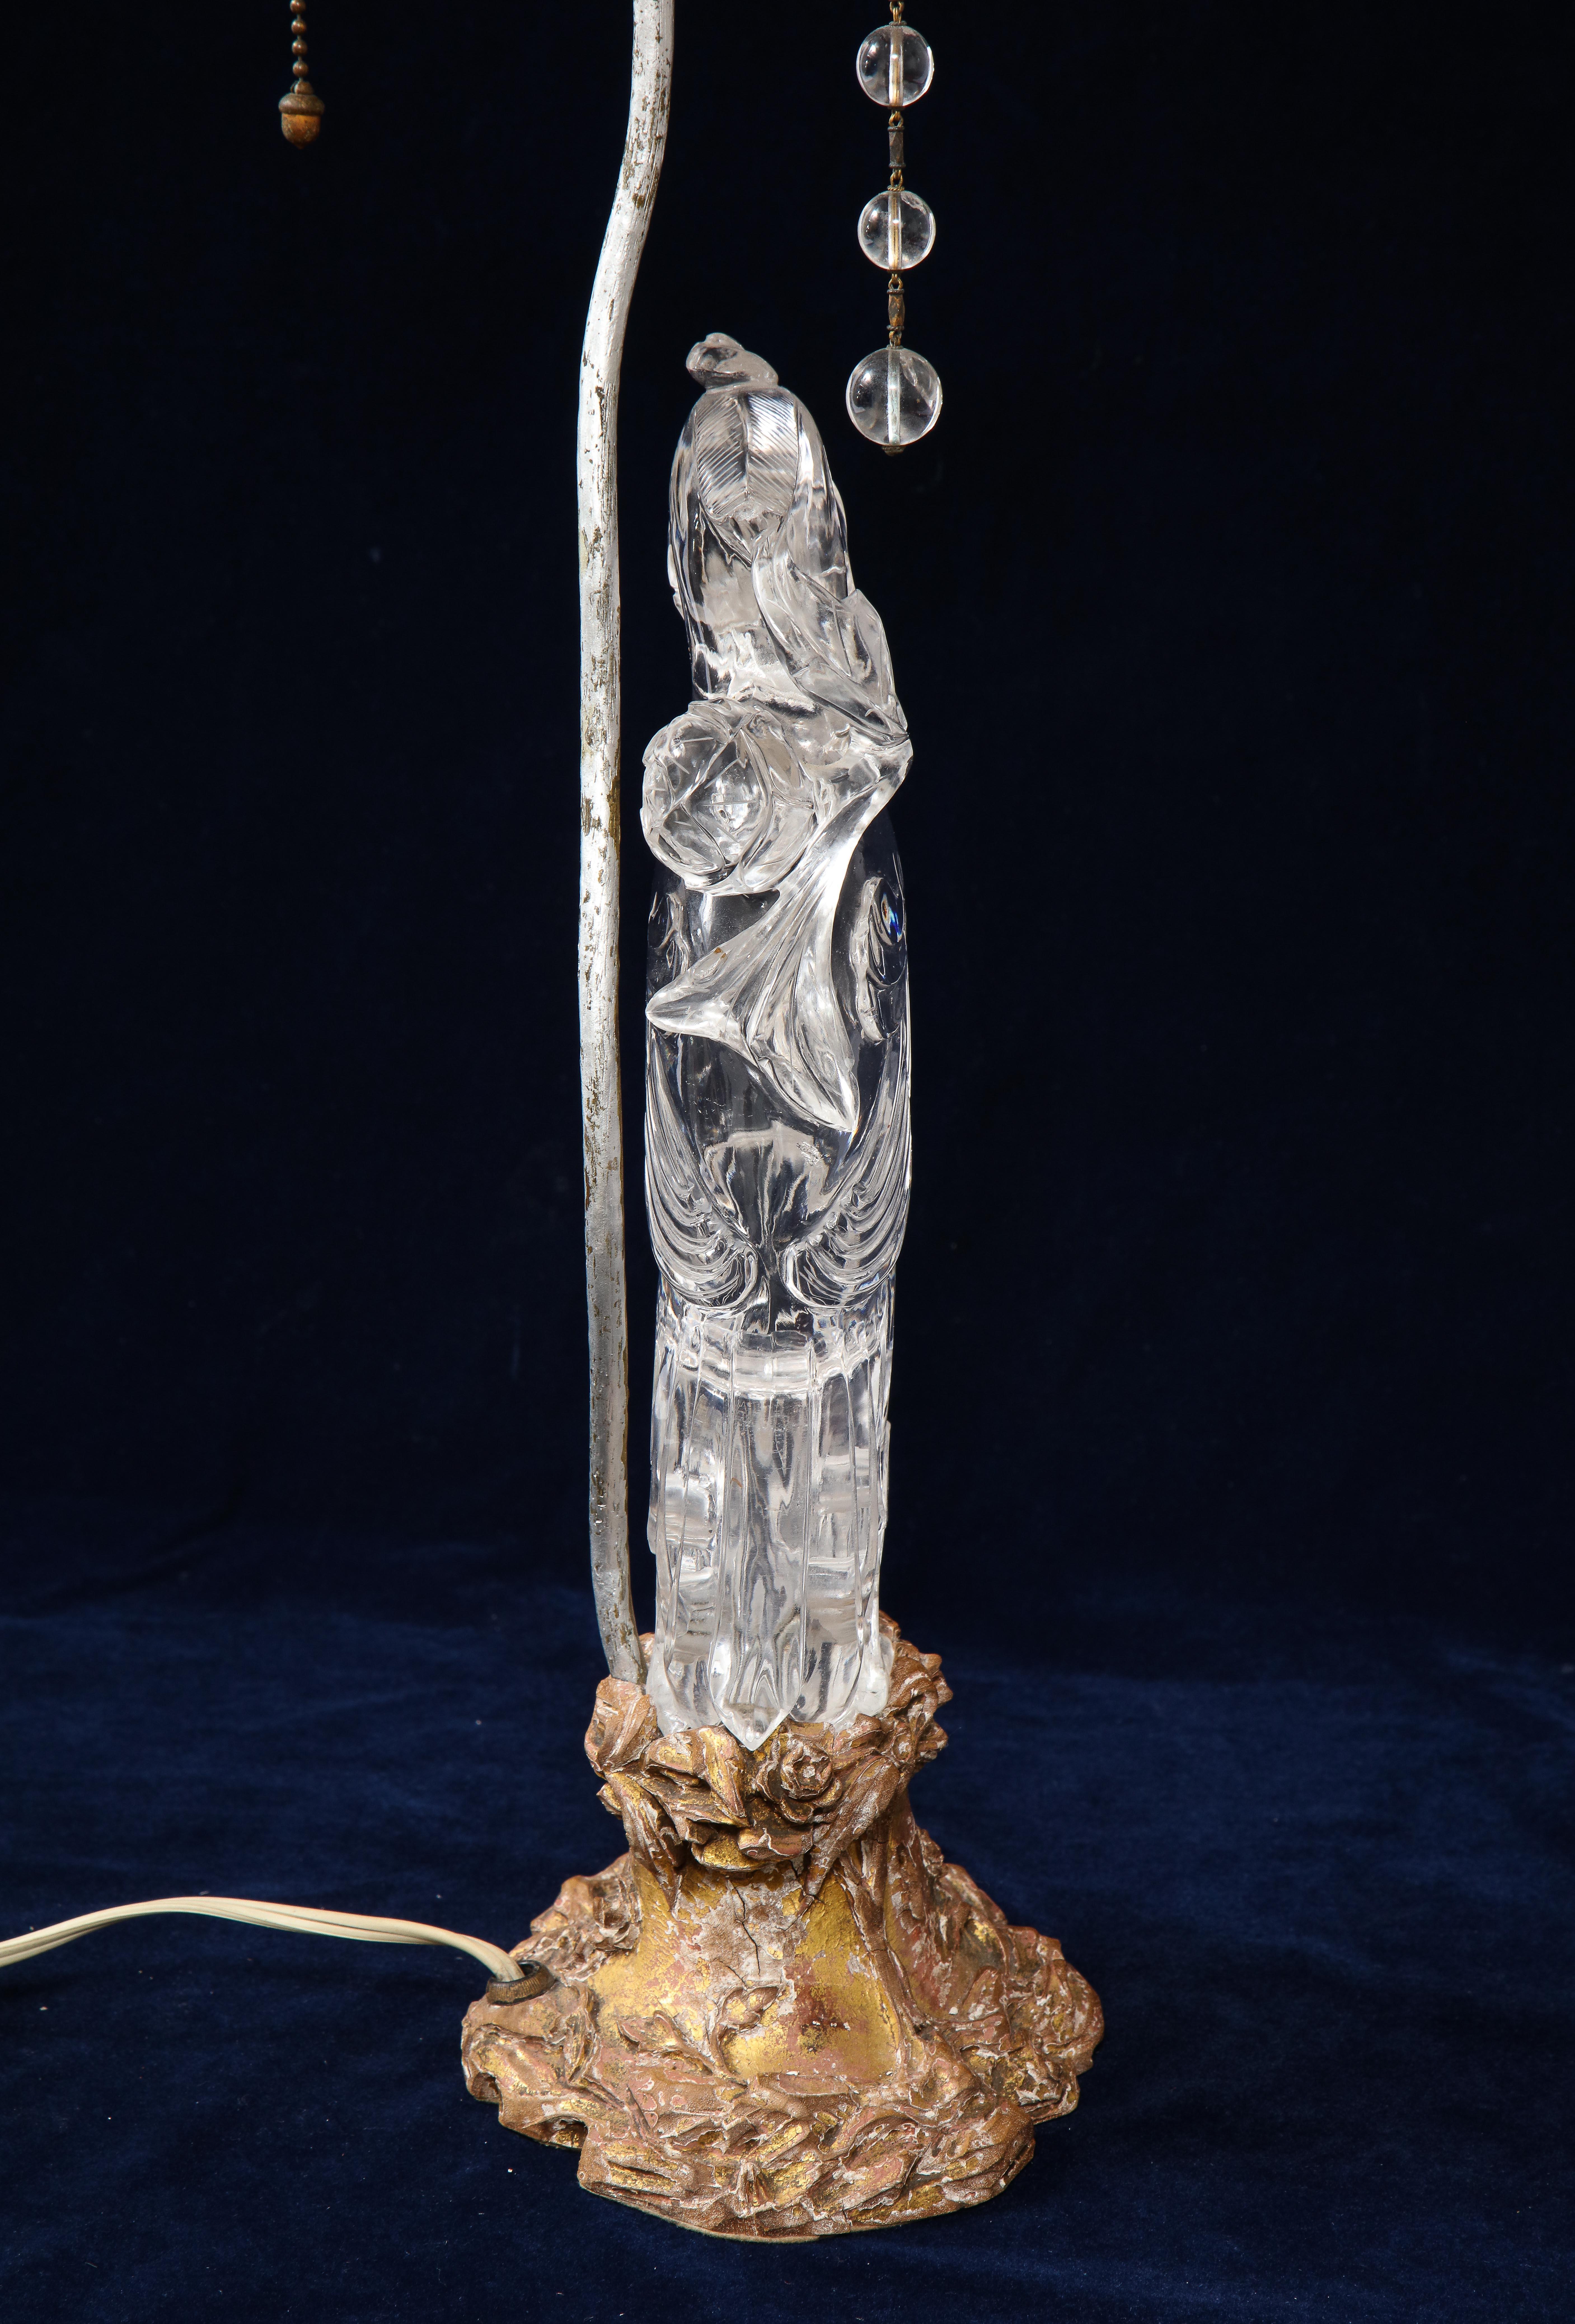 Chinese Export Large 19th Cent. Chinese Gilt Bornze Mtd Hand-Carved Rock Crystal Phoenix Lamp